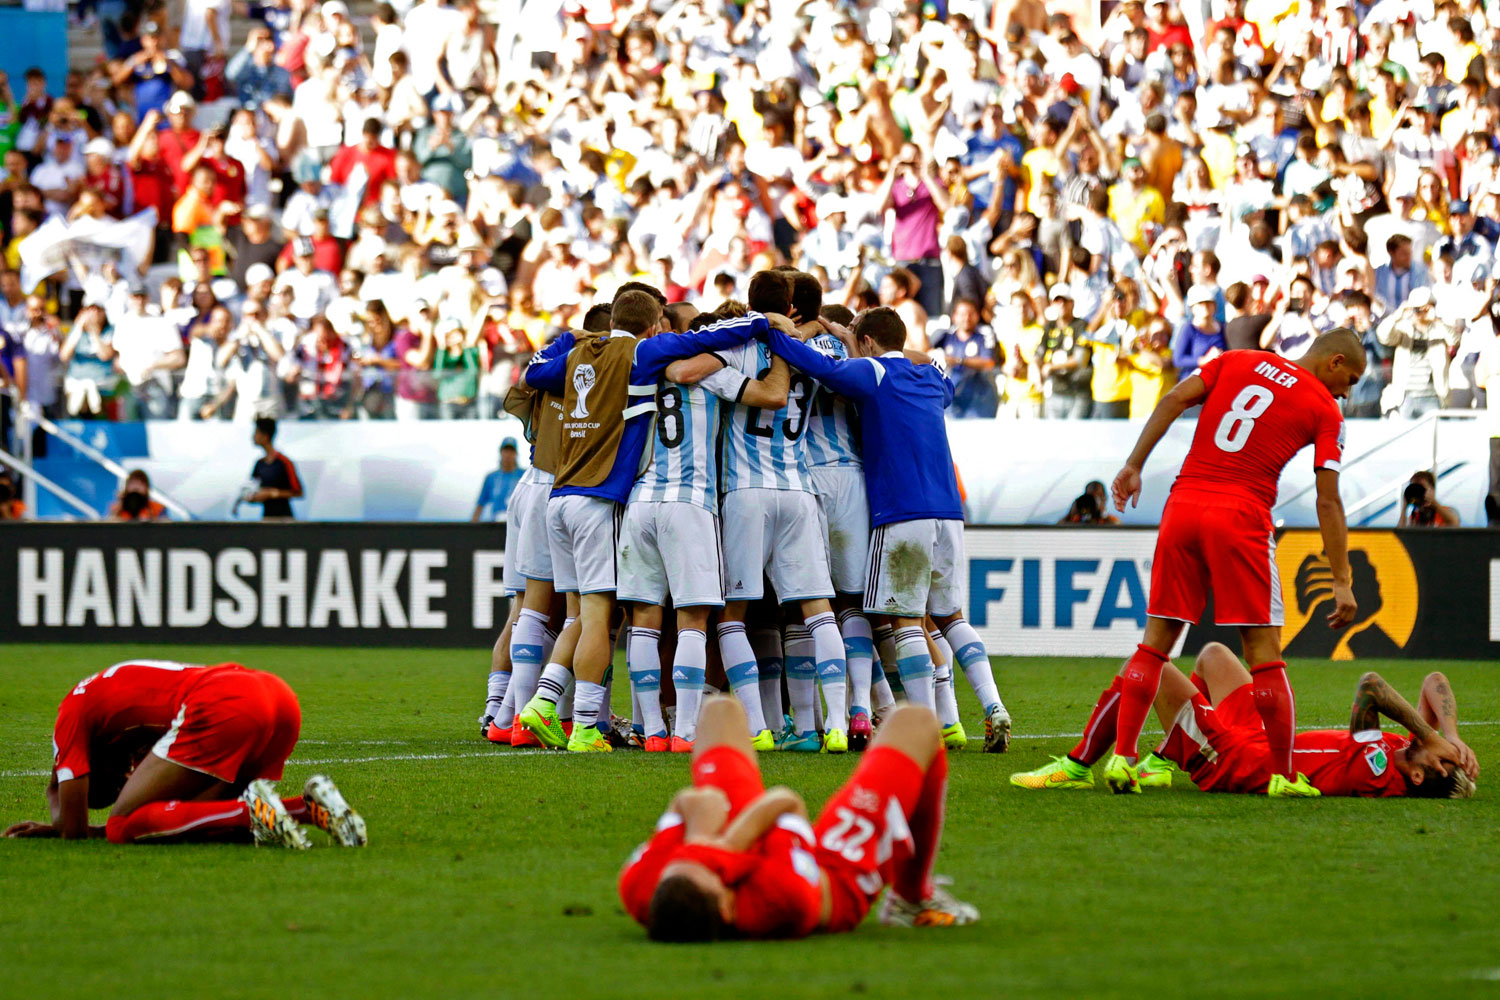 Swiss players show their dejection as Argentinian players celebrate after the FIFA World Cup 2014 round of 16 match between Argentina and Switzerland at the Arena Corinthians in Sao Paulo, Brazil on July 1, 2014.